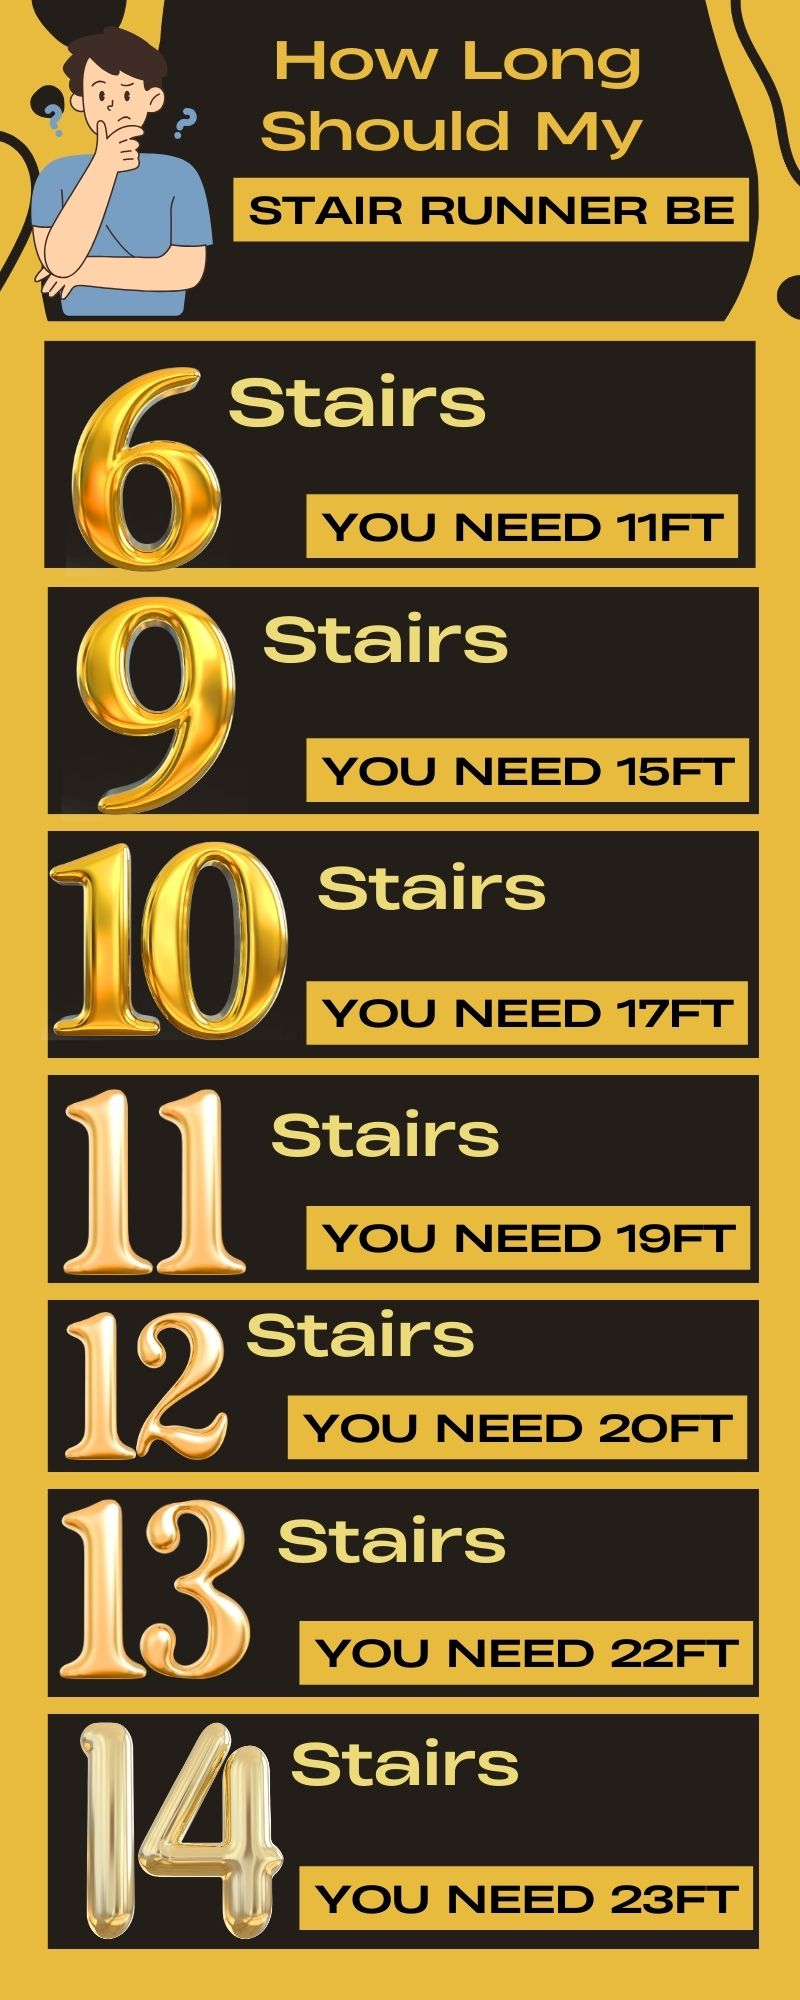 Infographic on How Many Feet Needed for a Stair Runner from 6 stairs to 14 stairs